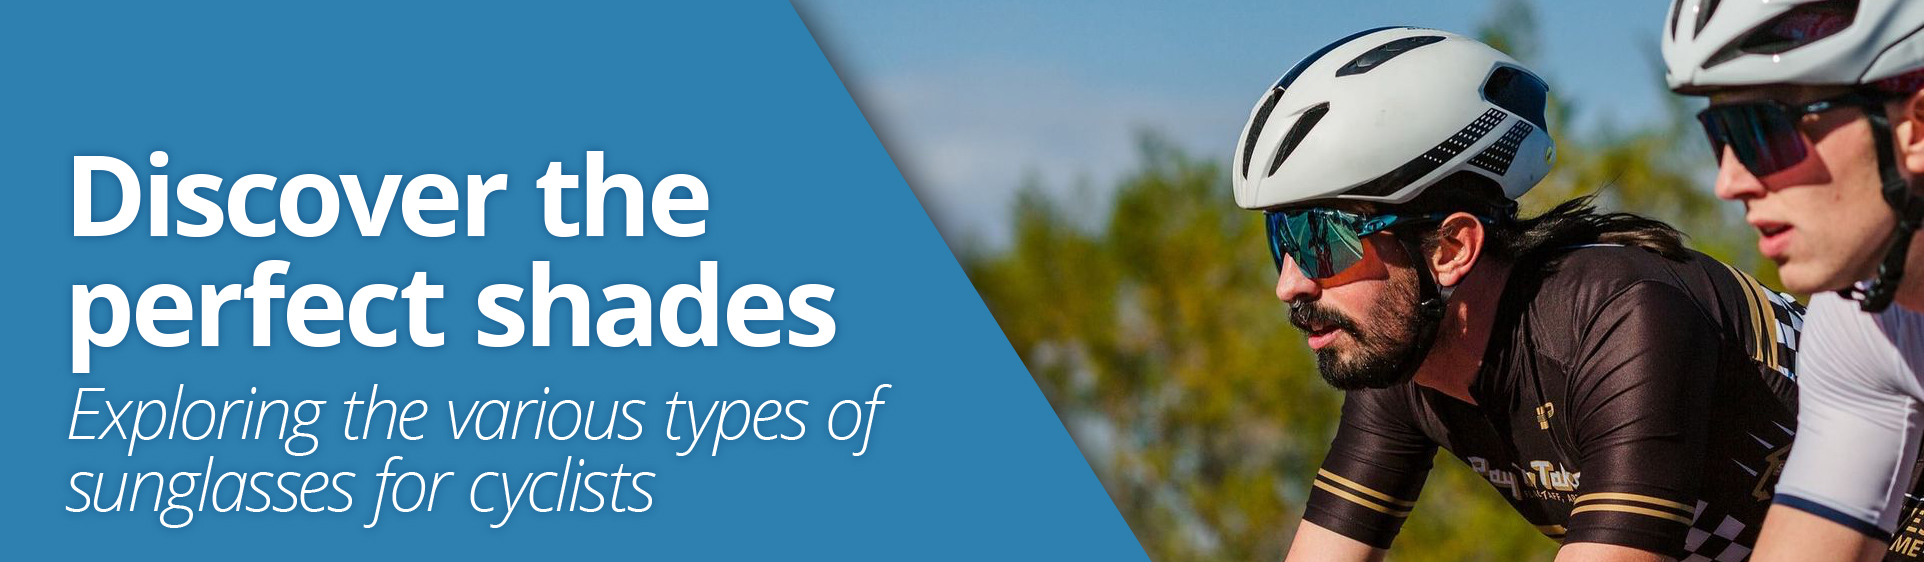 Guide to cycling sunglasses - Eurocycles Ireland